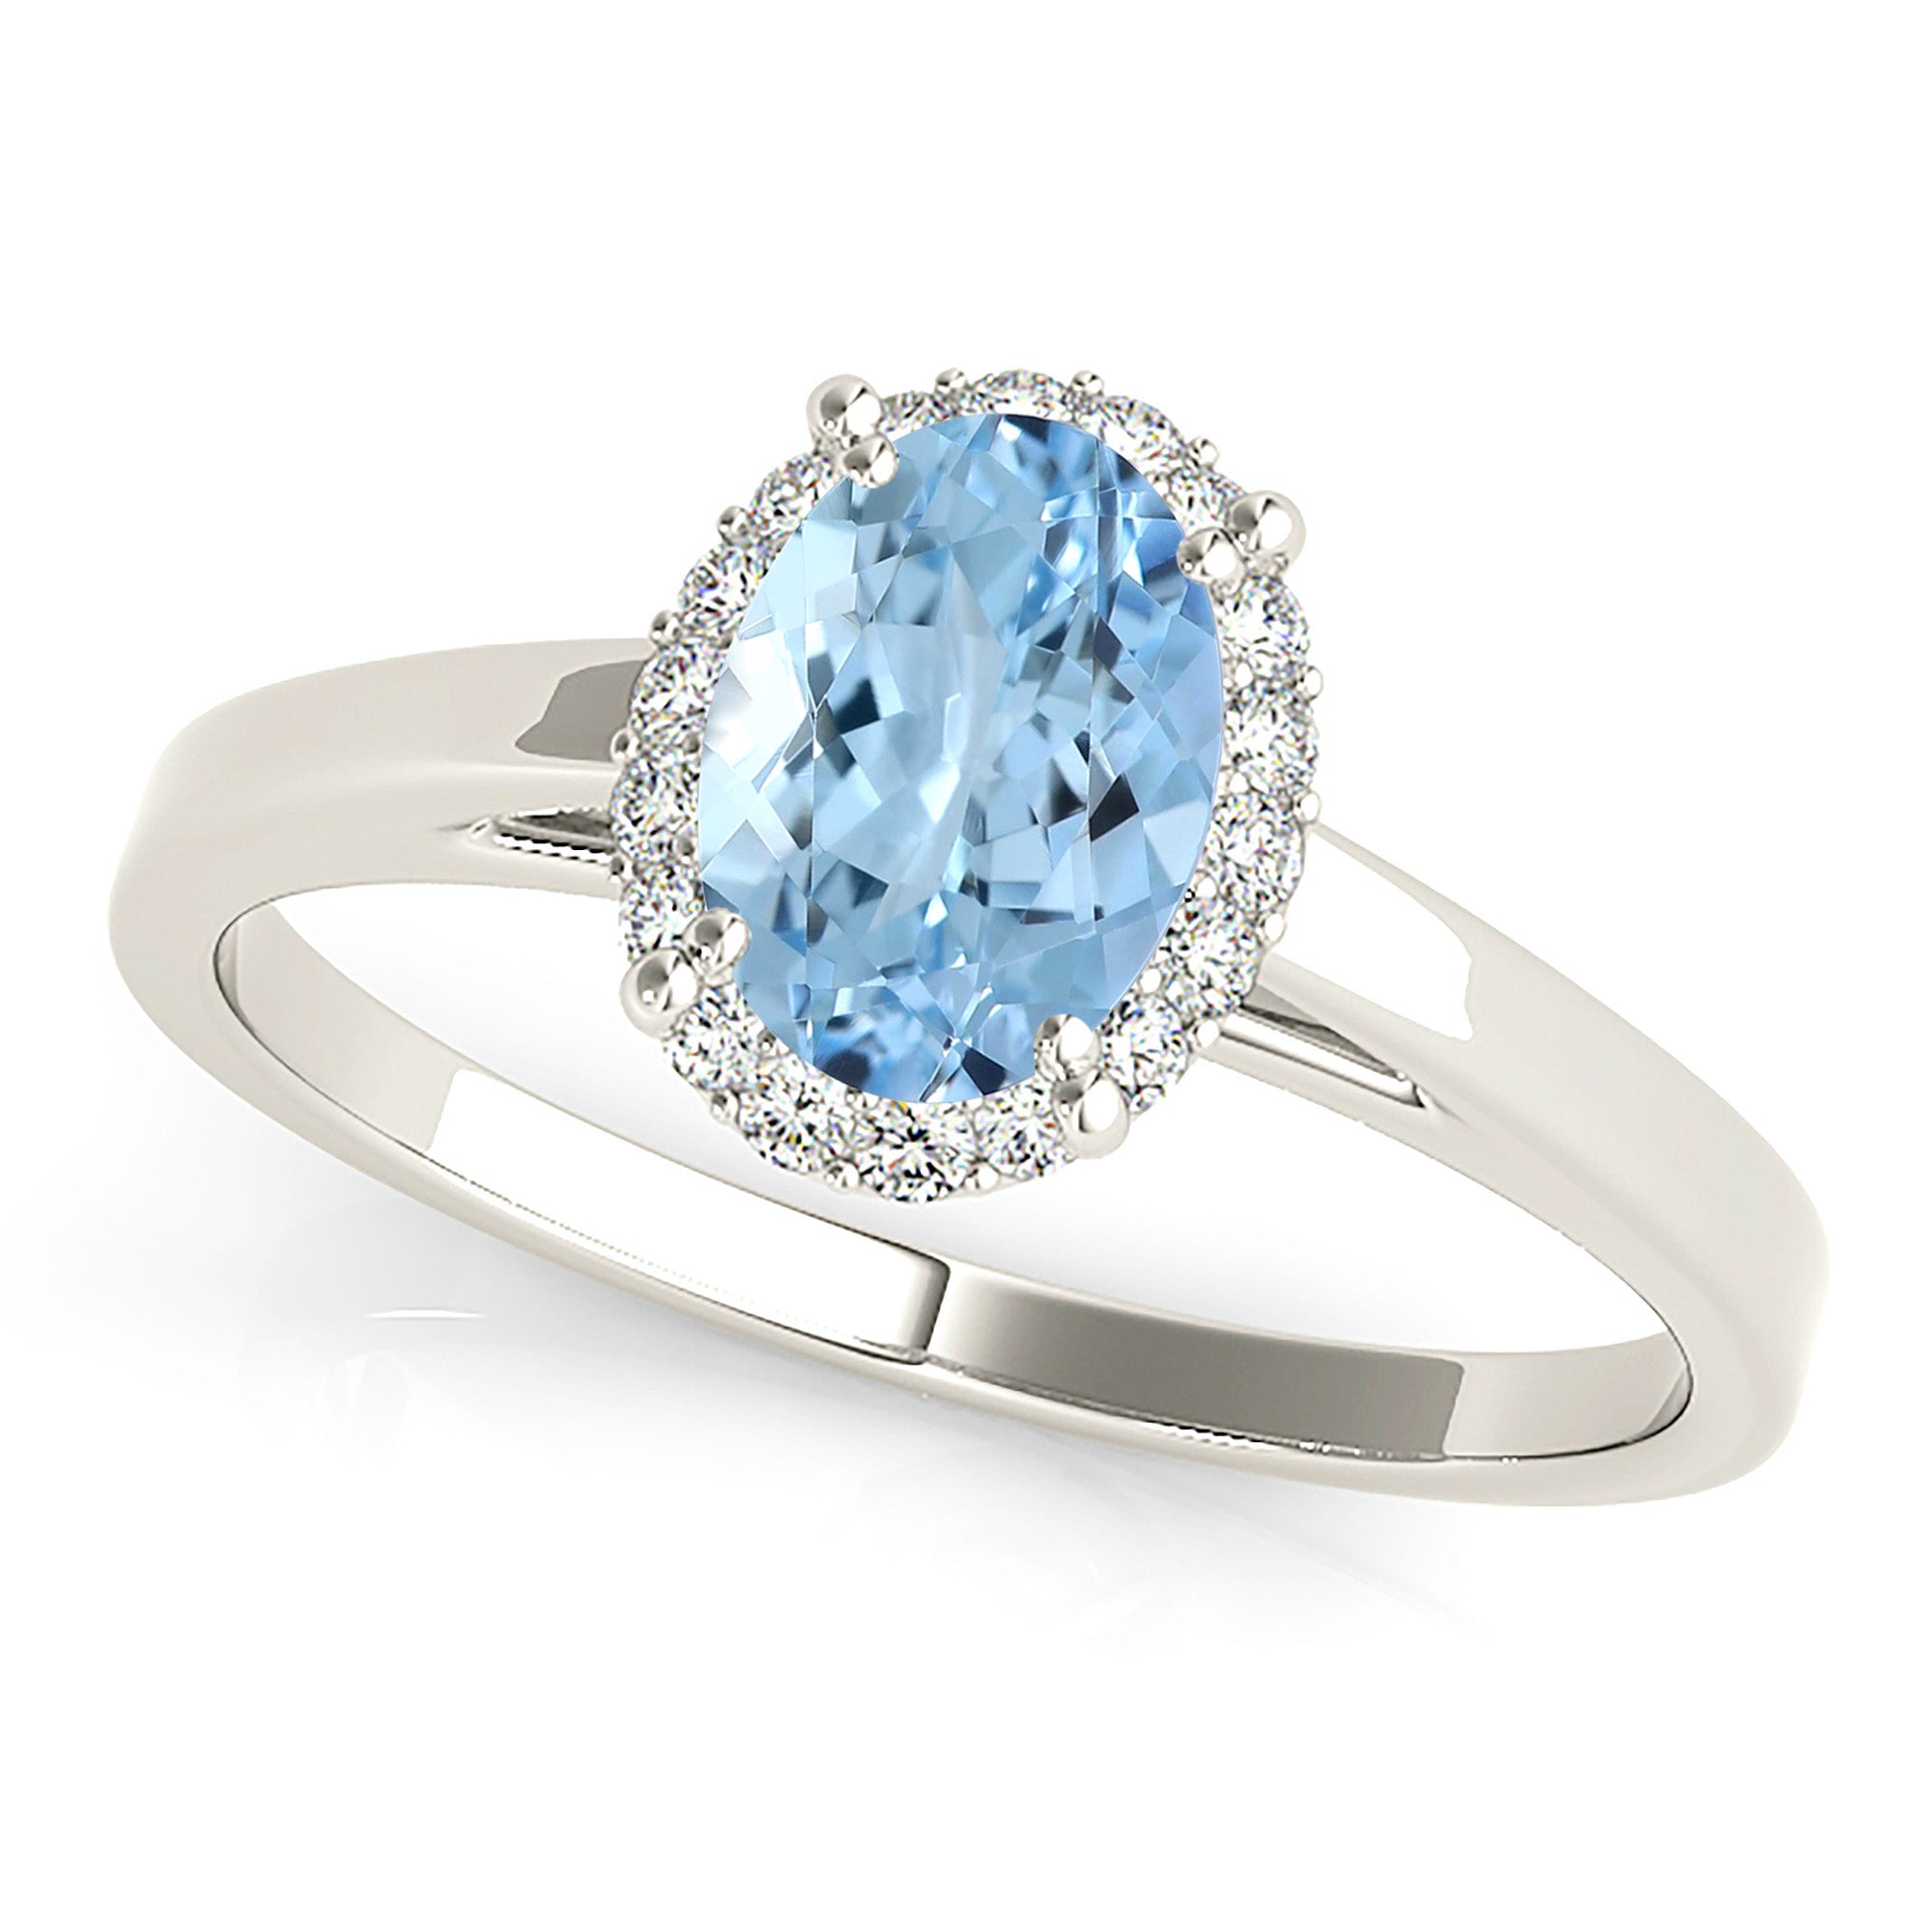 1.27 ct. Genuine Oval Aquamarine Ring With 0.20 ctw. Diamond Halo and Solid Gold Band | Oval Blue Aquamarine Halo Ring-in 14K/18K White, Yellow, Rose Gold and Platinum - Christmas Jewelry Gift -VIRABYANI